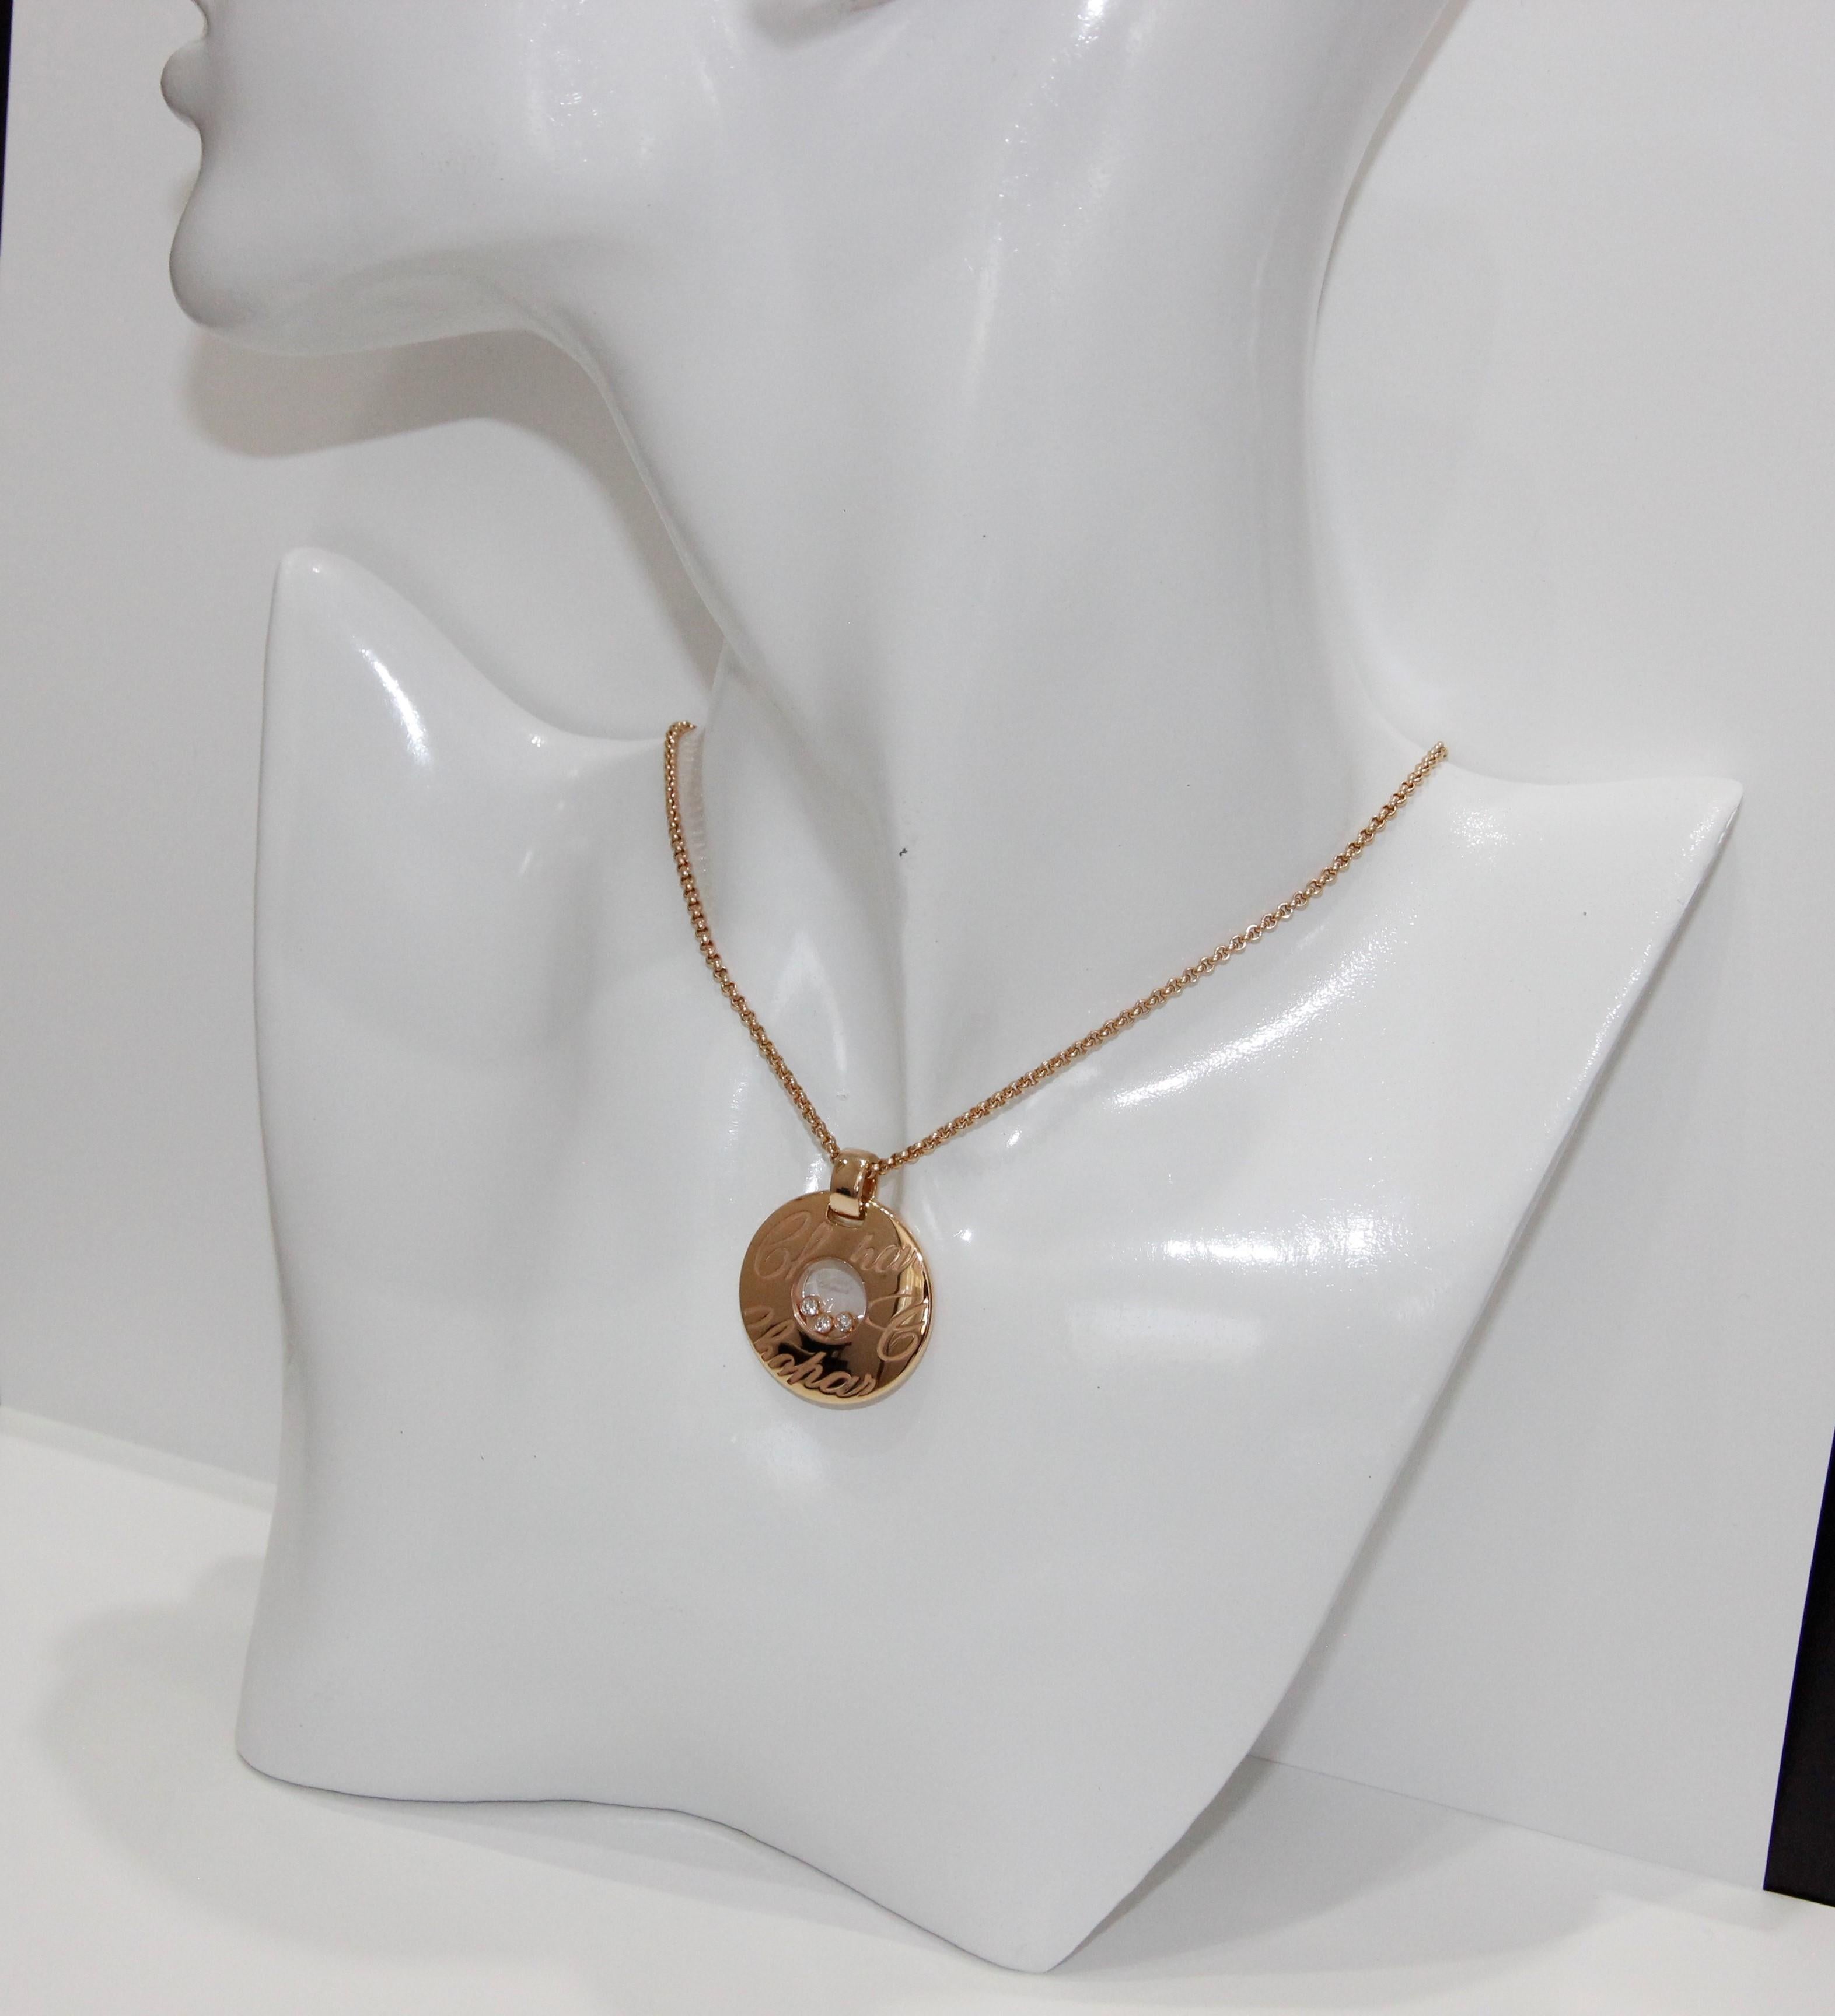 Women's or Men's Chopard 18k Rose Gold  Chopardissimo Necklace                       